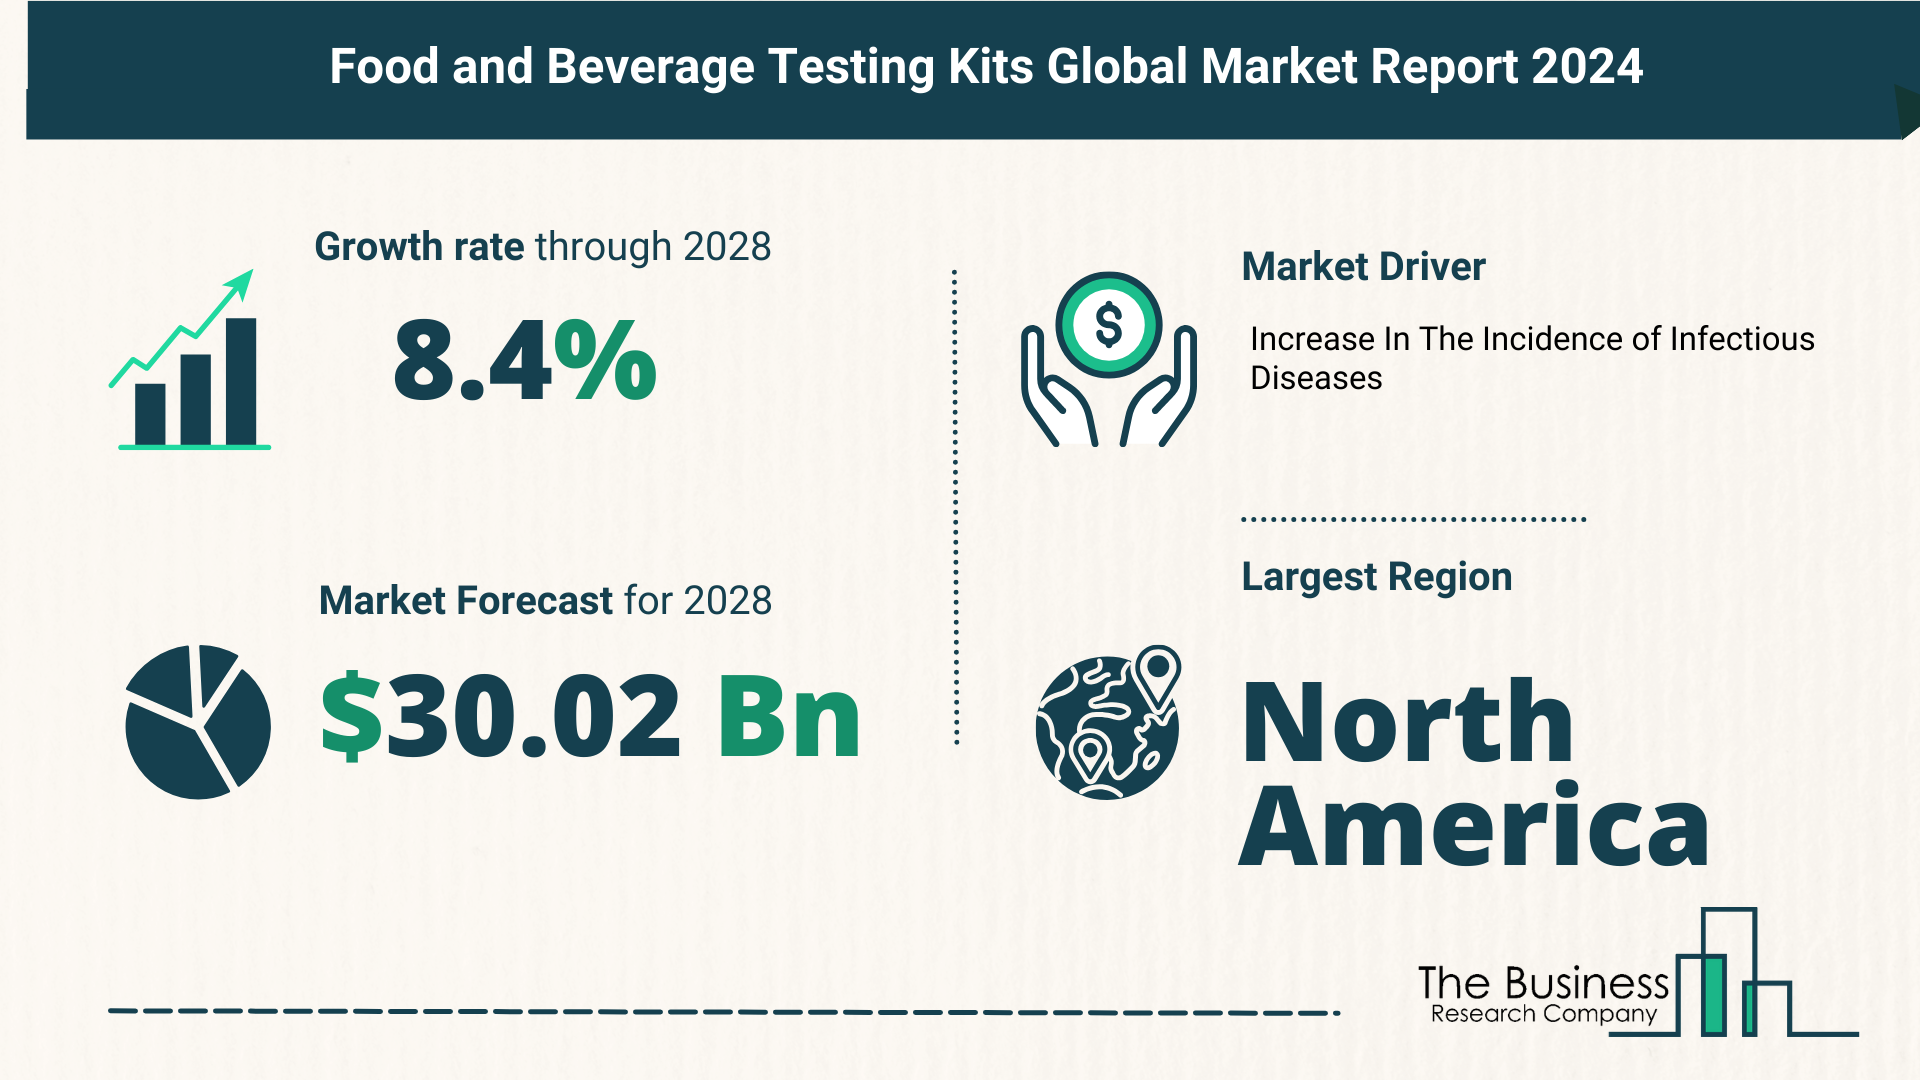 Food and Beverage Testing Kits Market Report 2024: Market Size, Drivers, And Trends